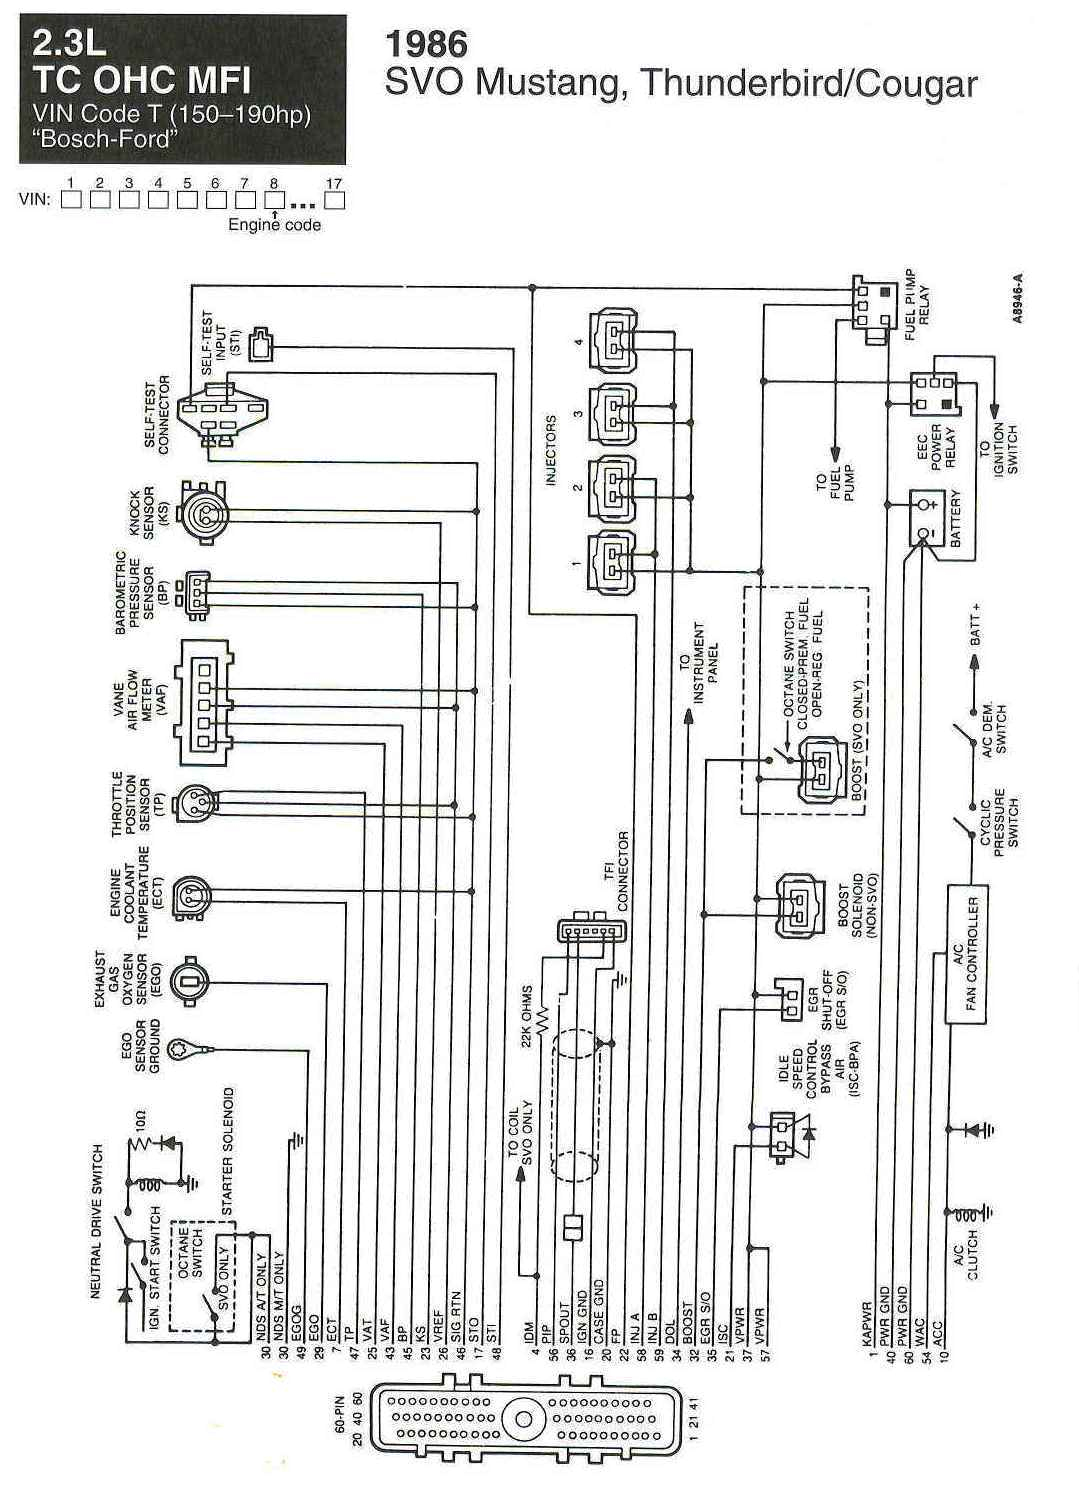 wiring diagrams for svo